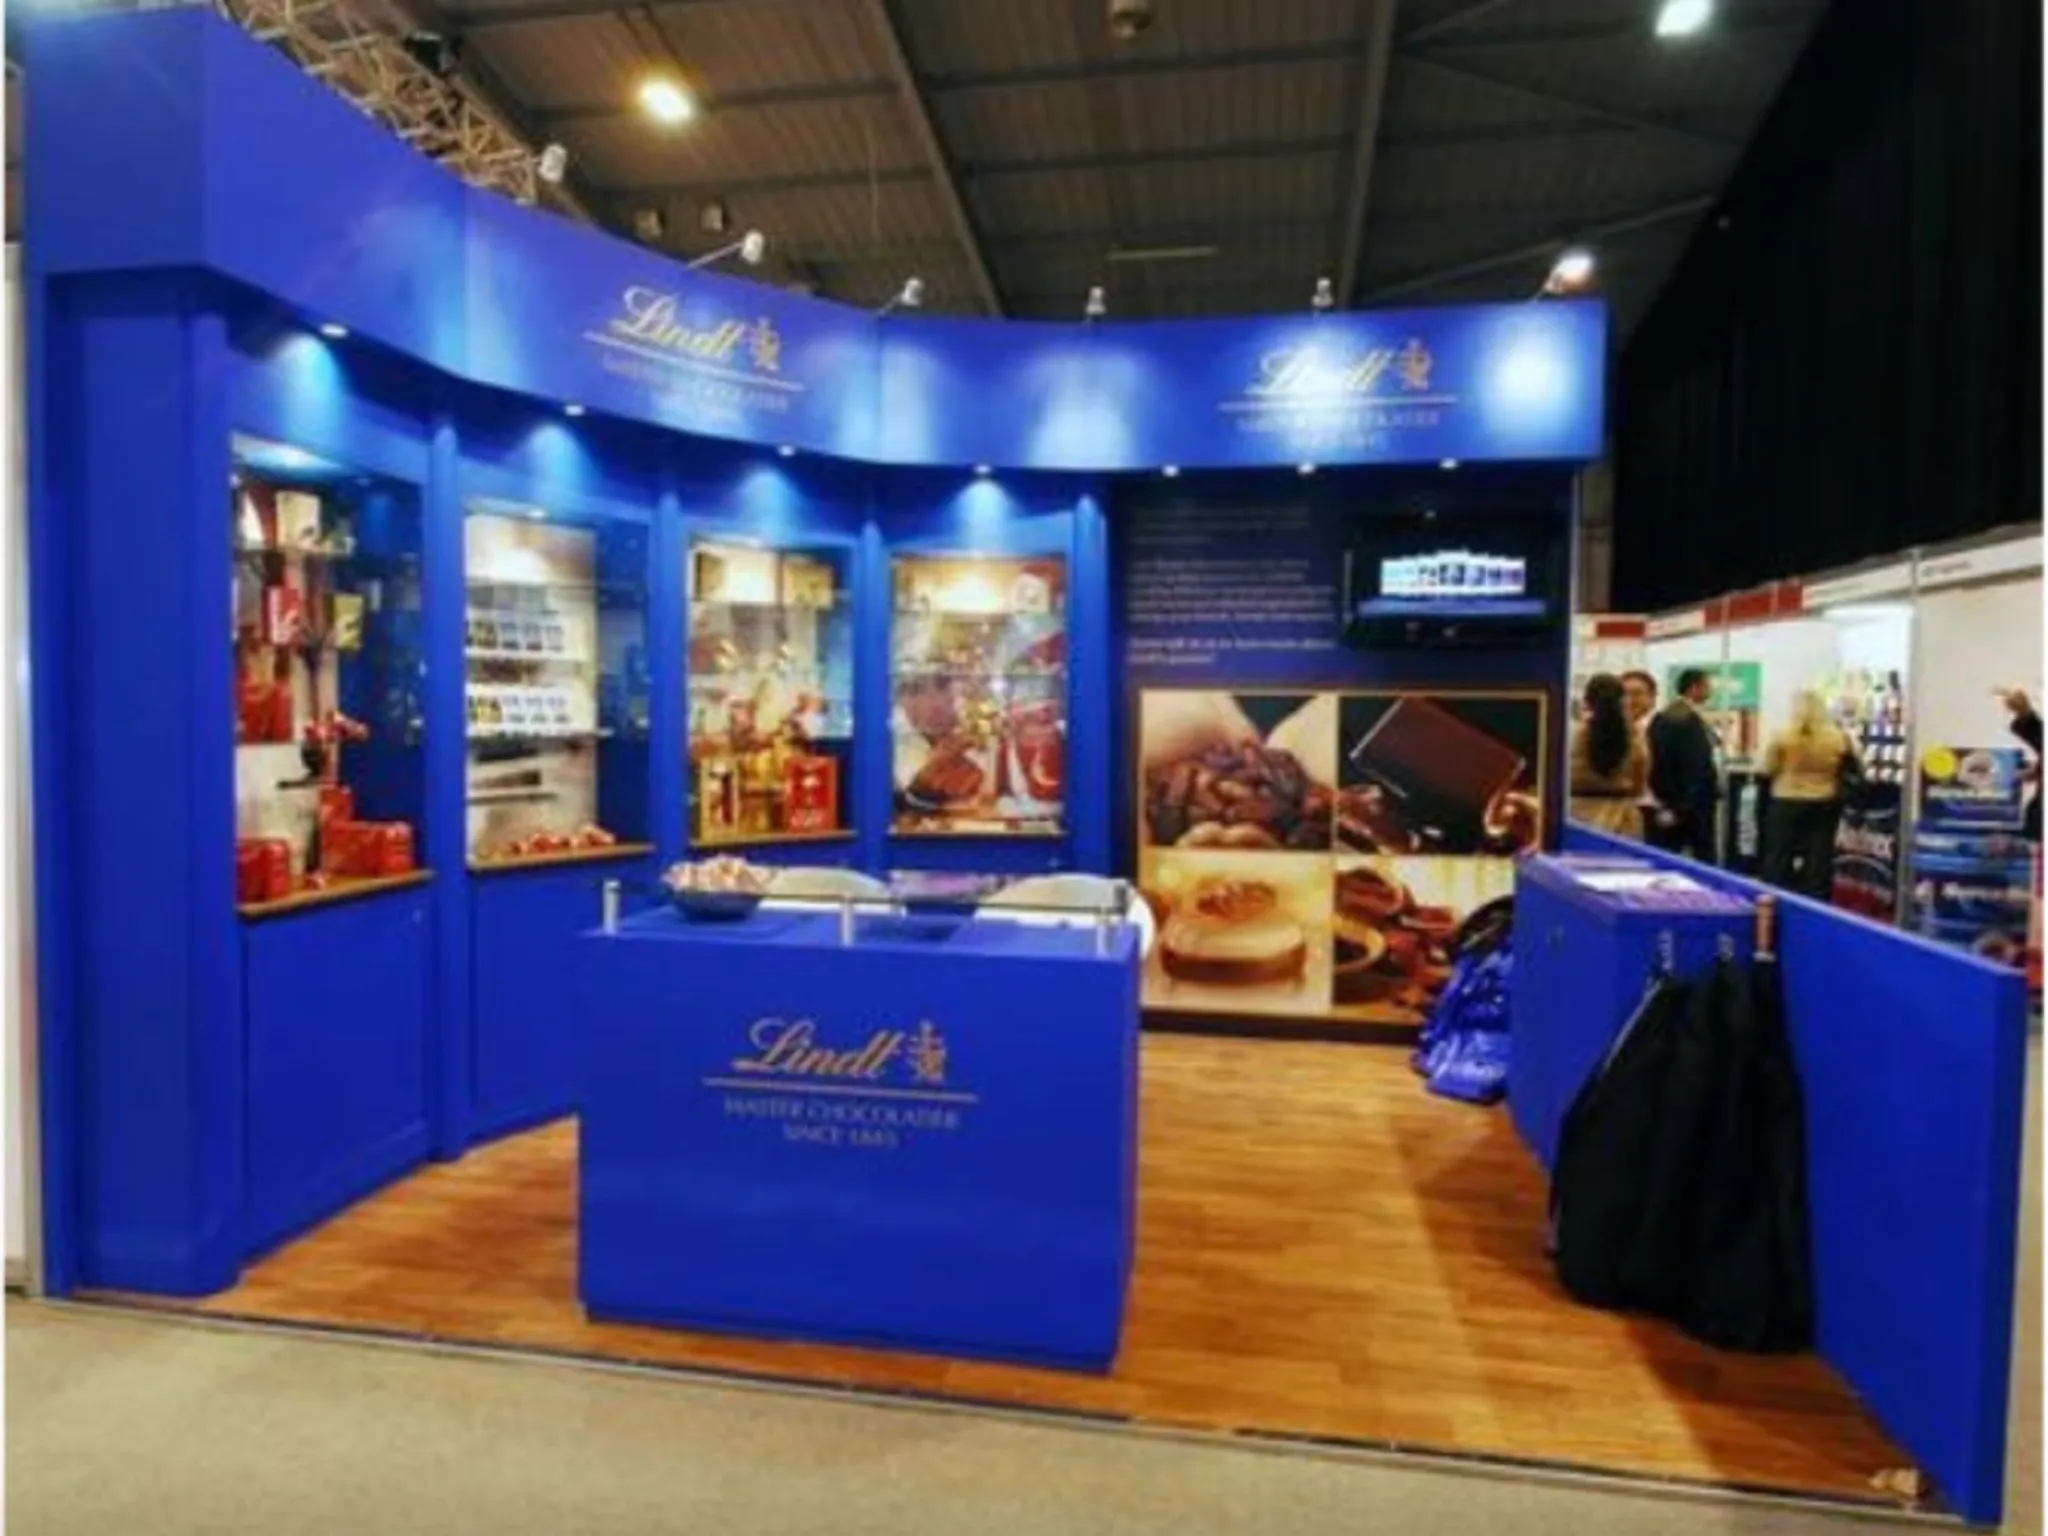 Royal Exhibition Stand example